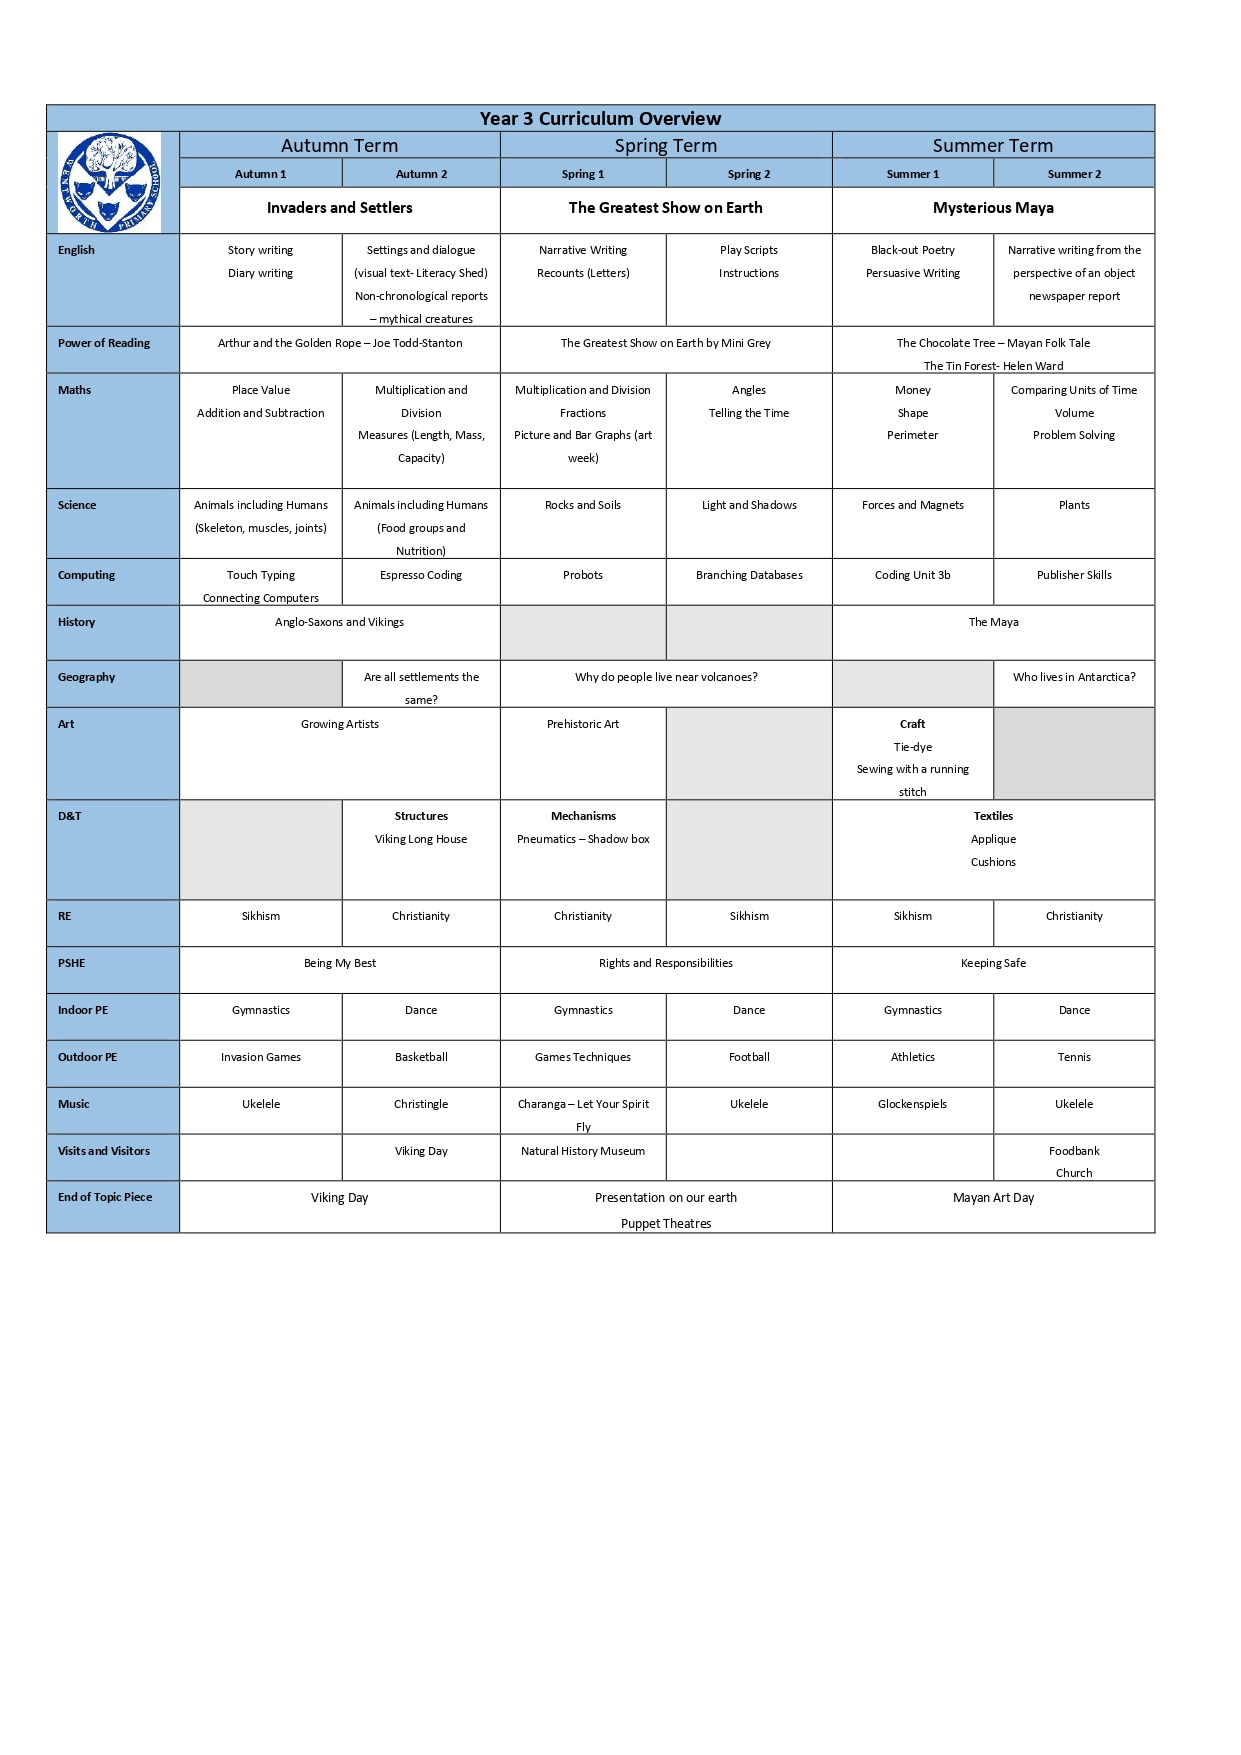 Curriculum Map Year 3 in completed_page-0001.jpg